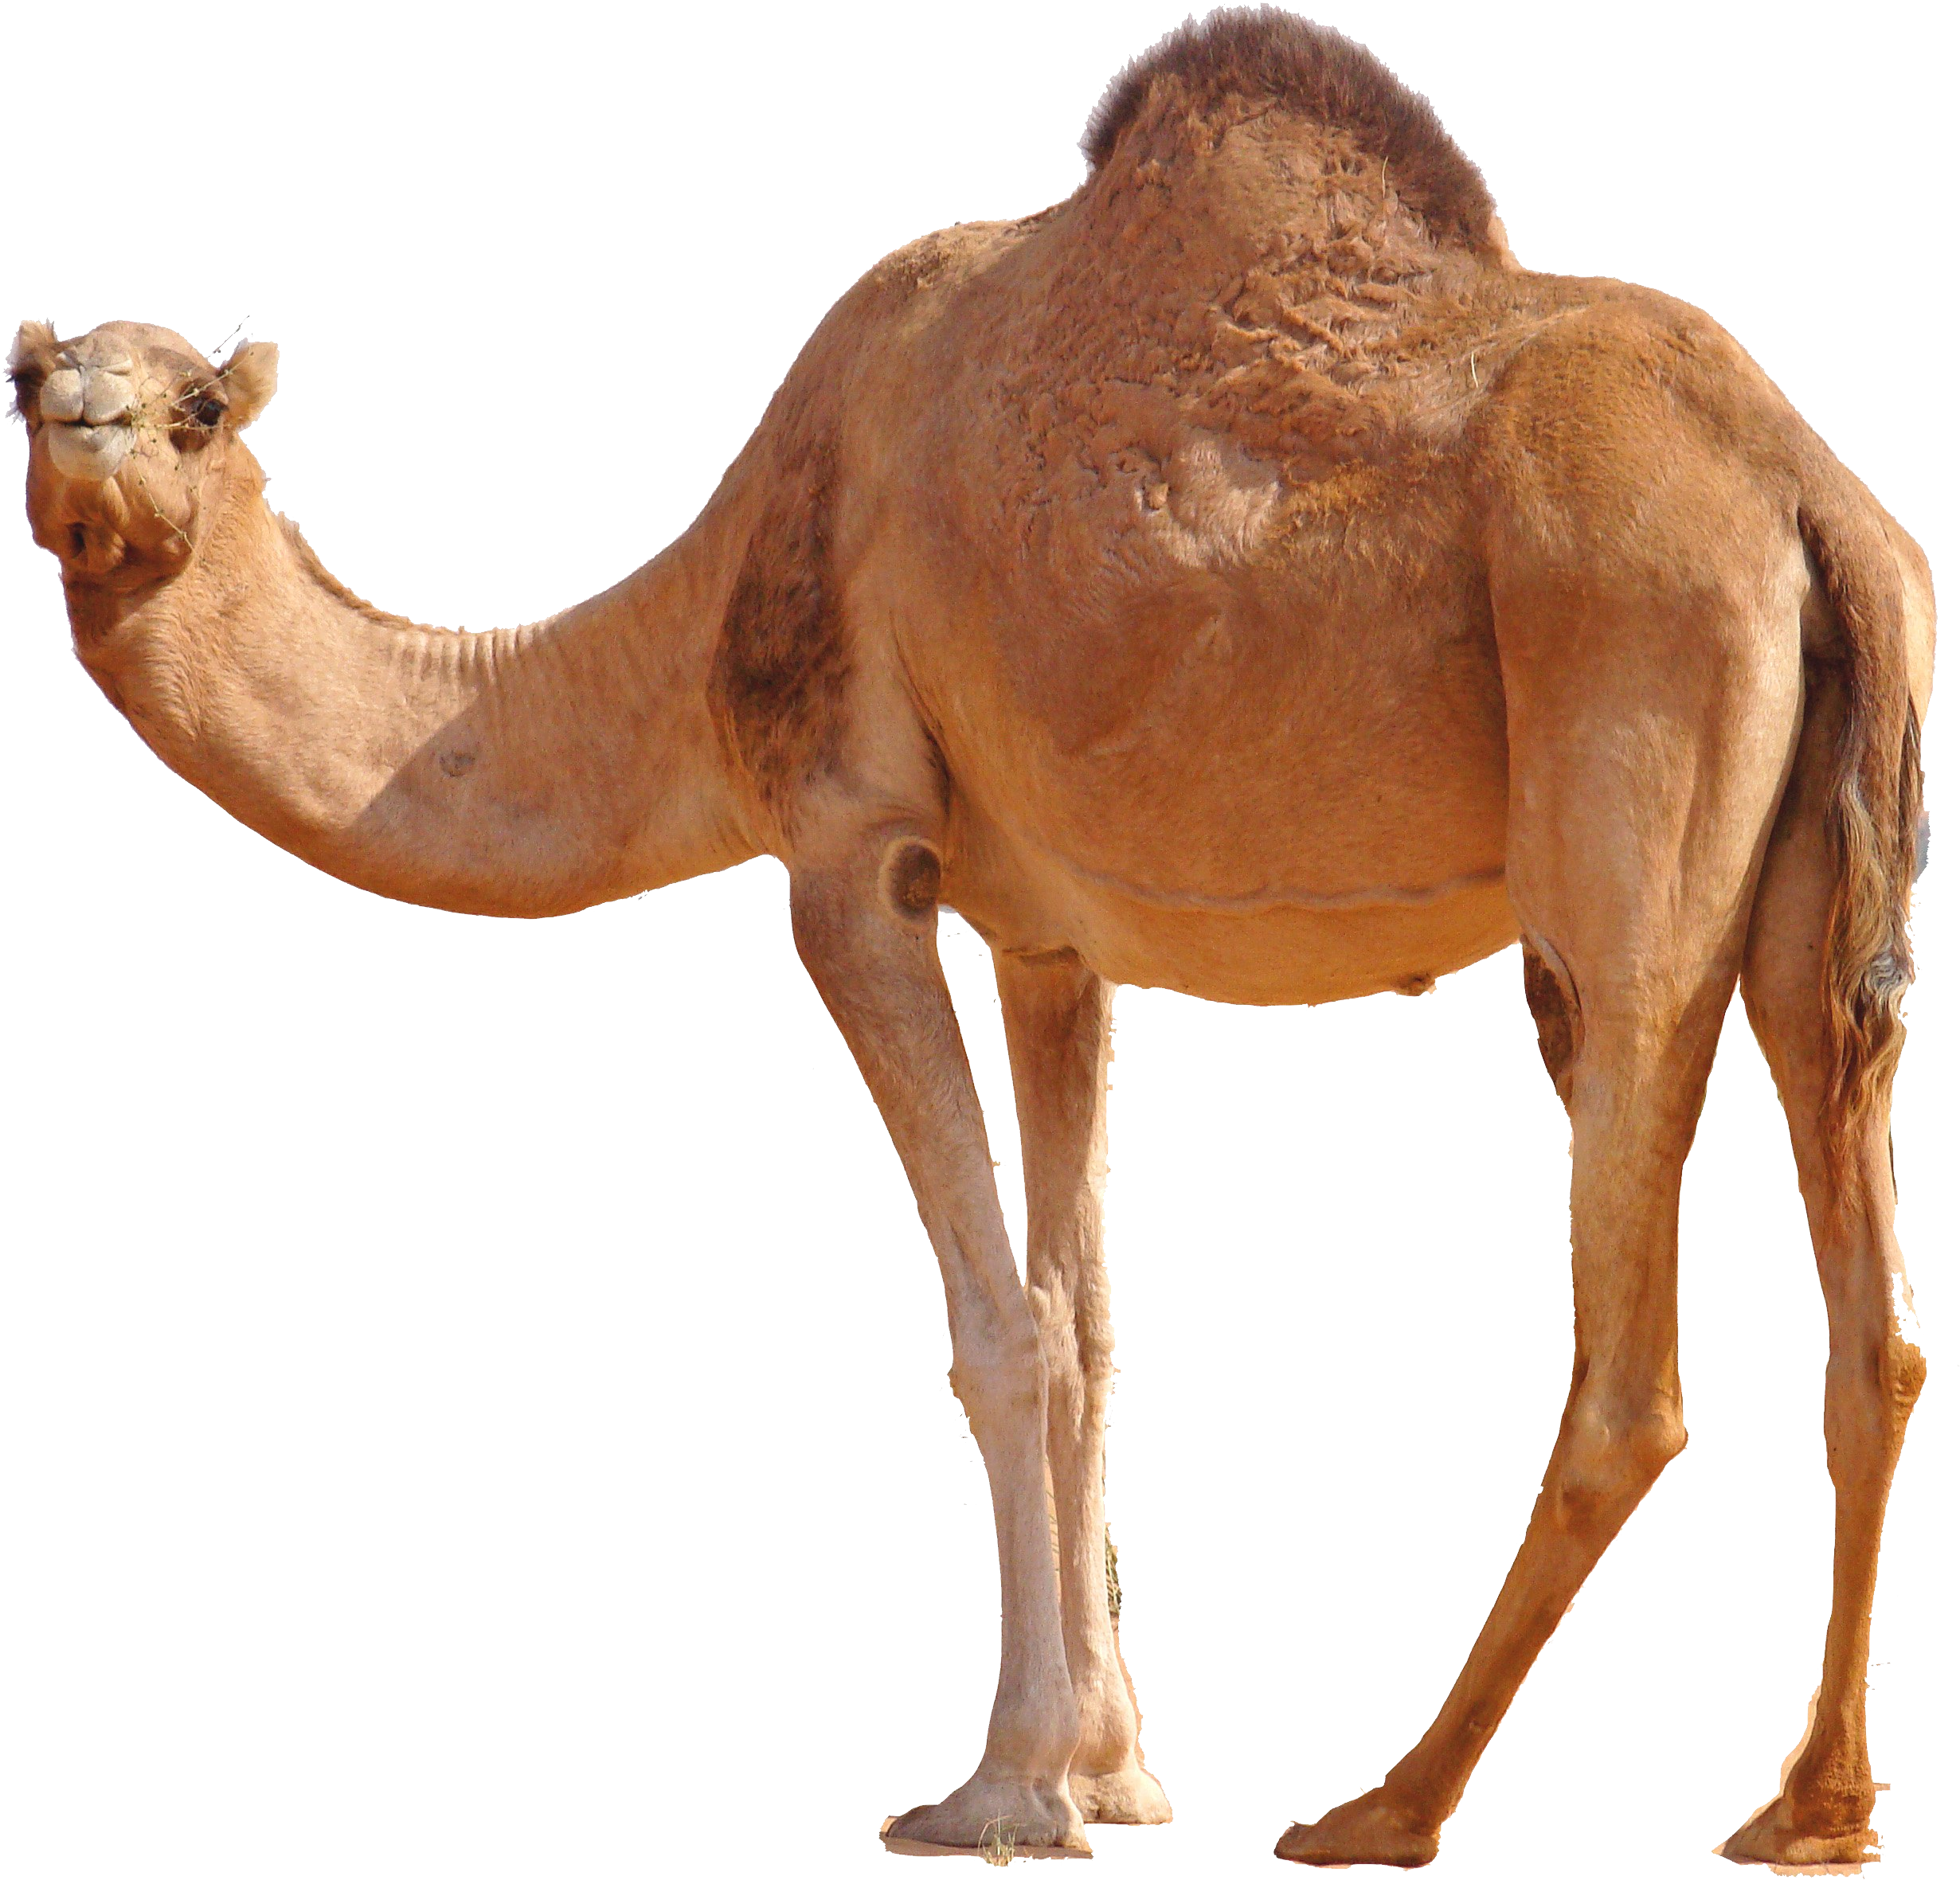 Desert Camel, Camels, Luotuo,